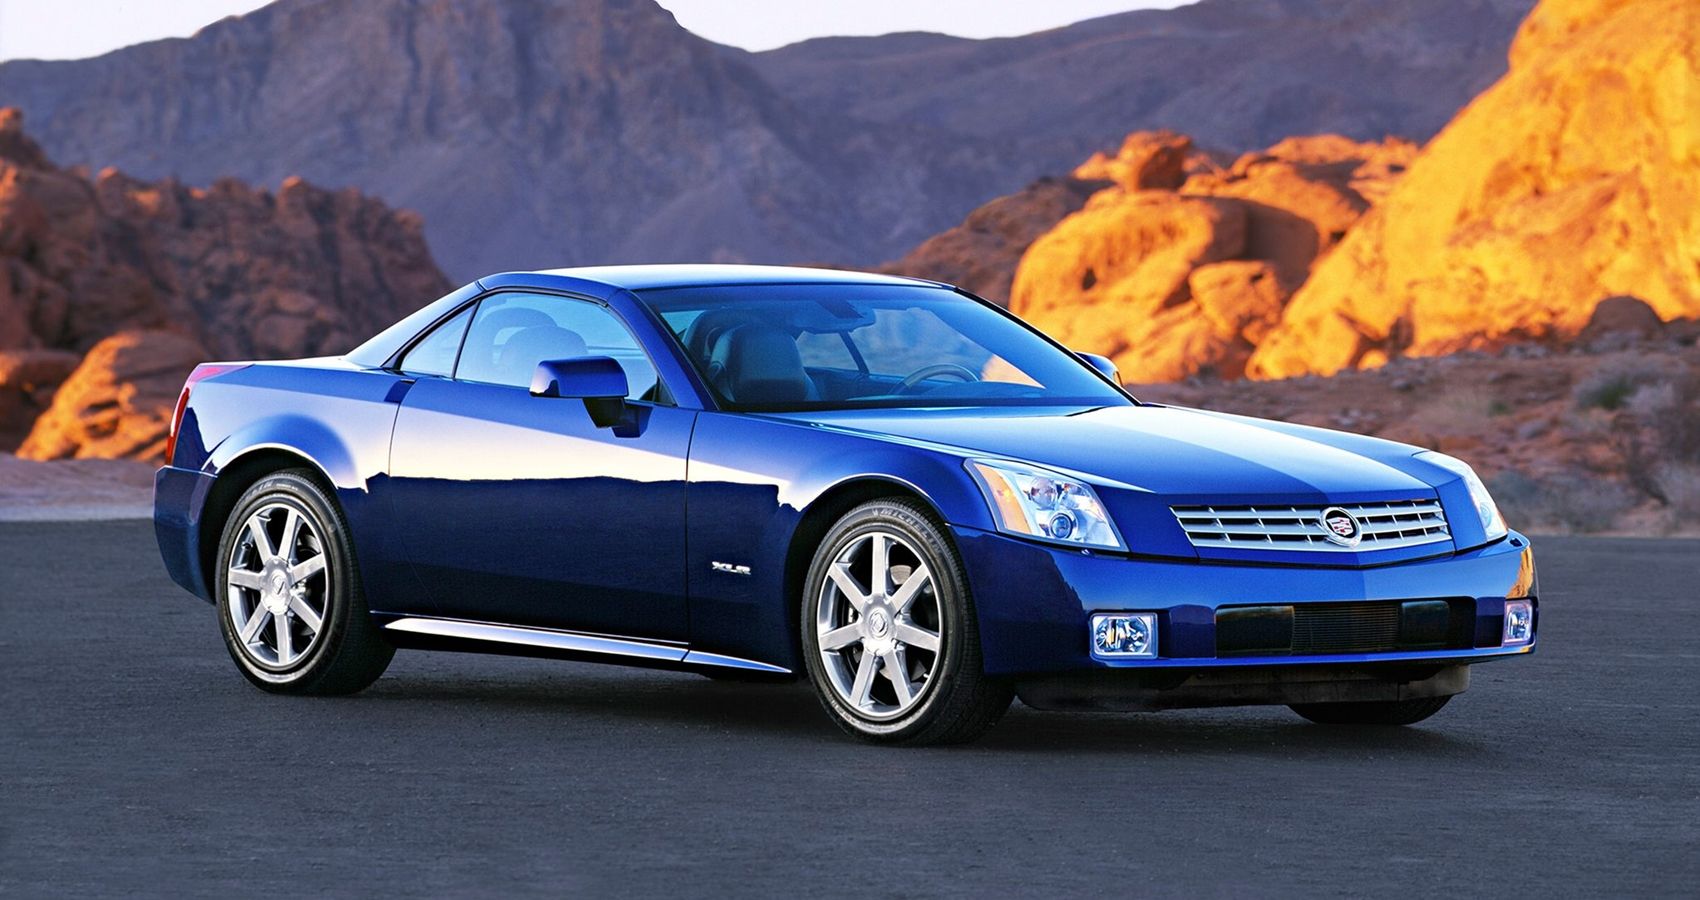 10 American Cars That Look Cool, But Should Never Be Bought By Anyone